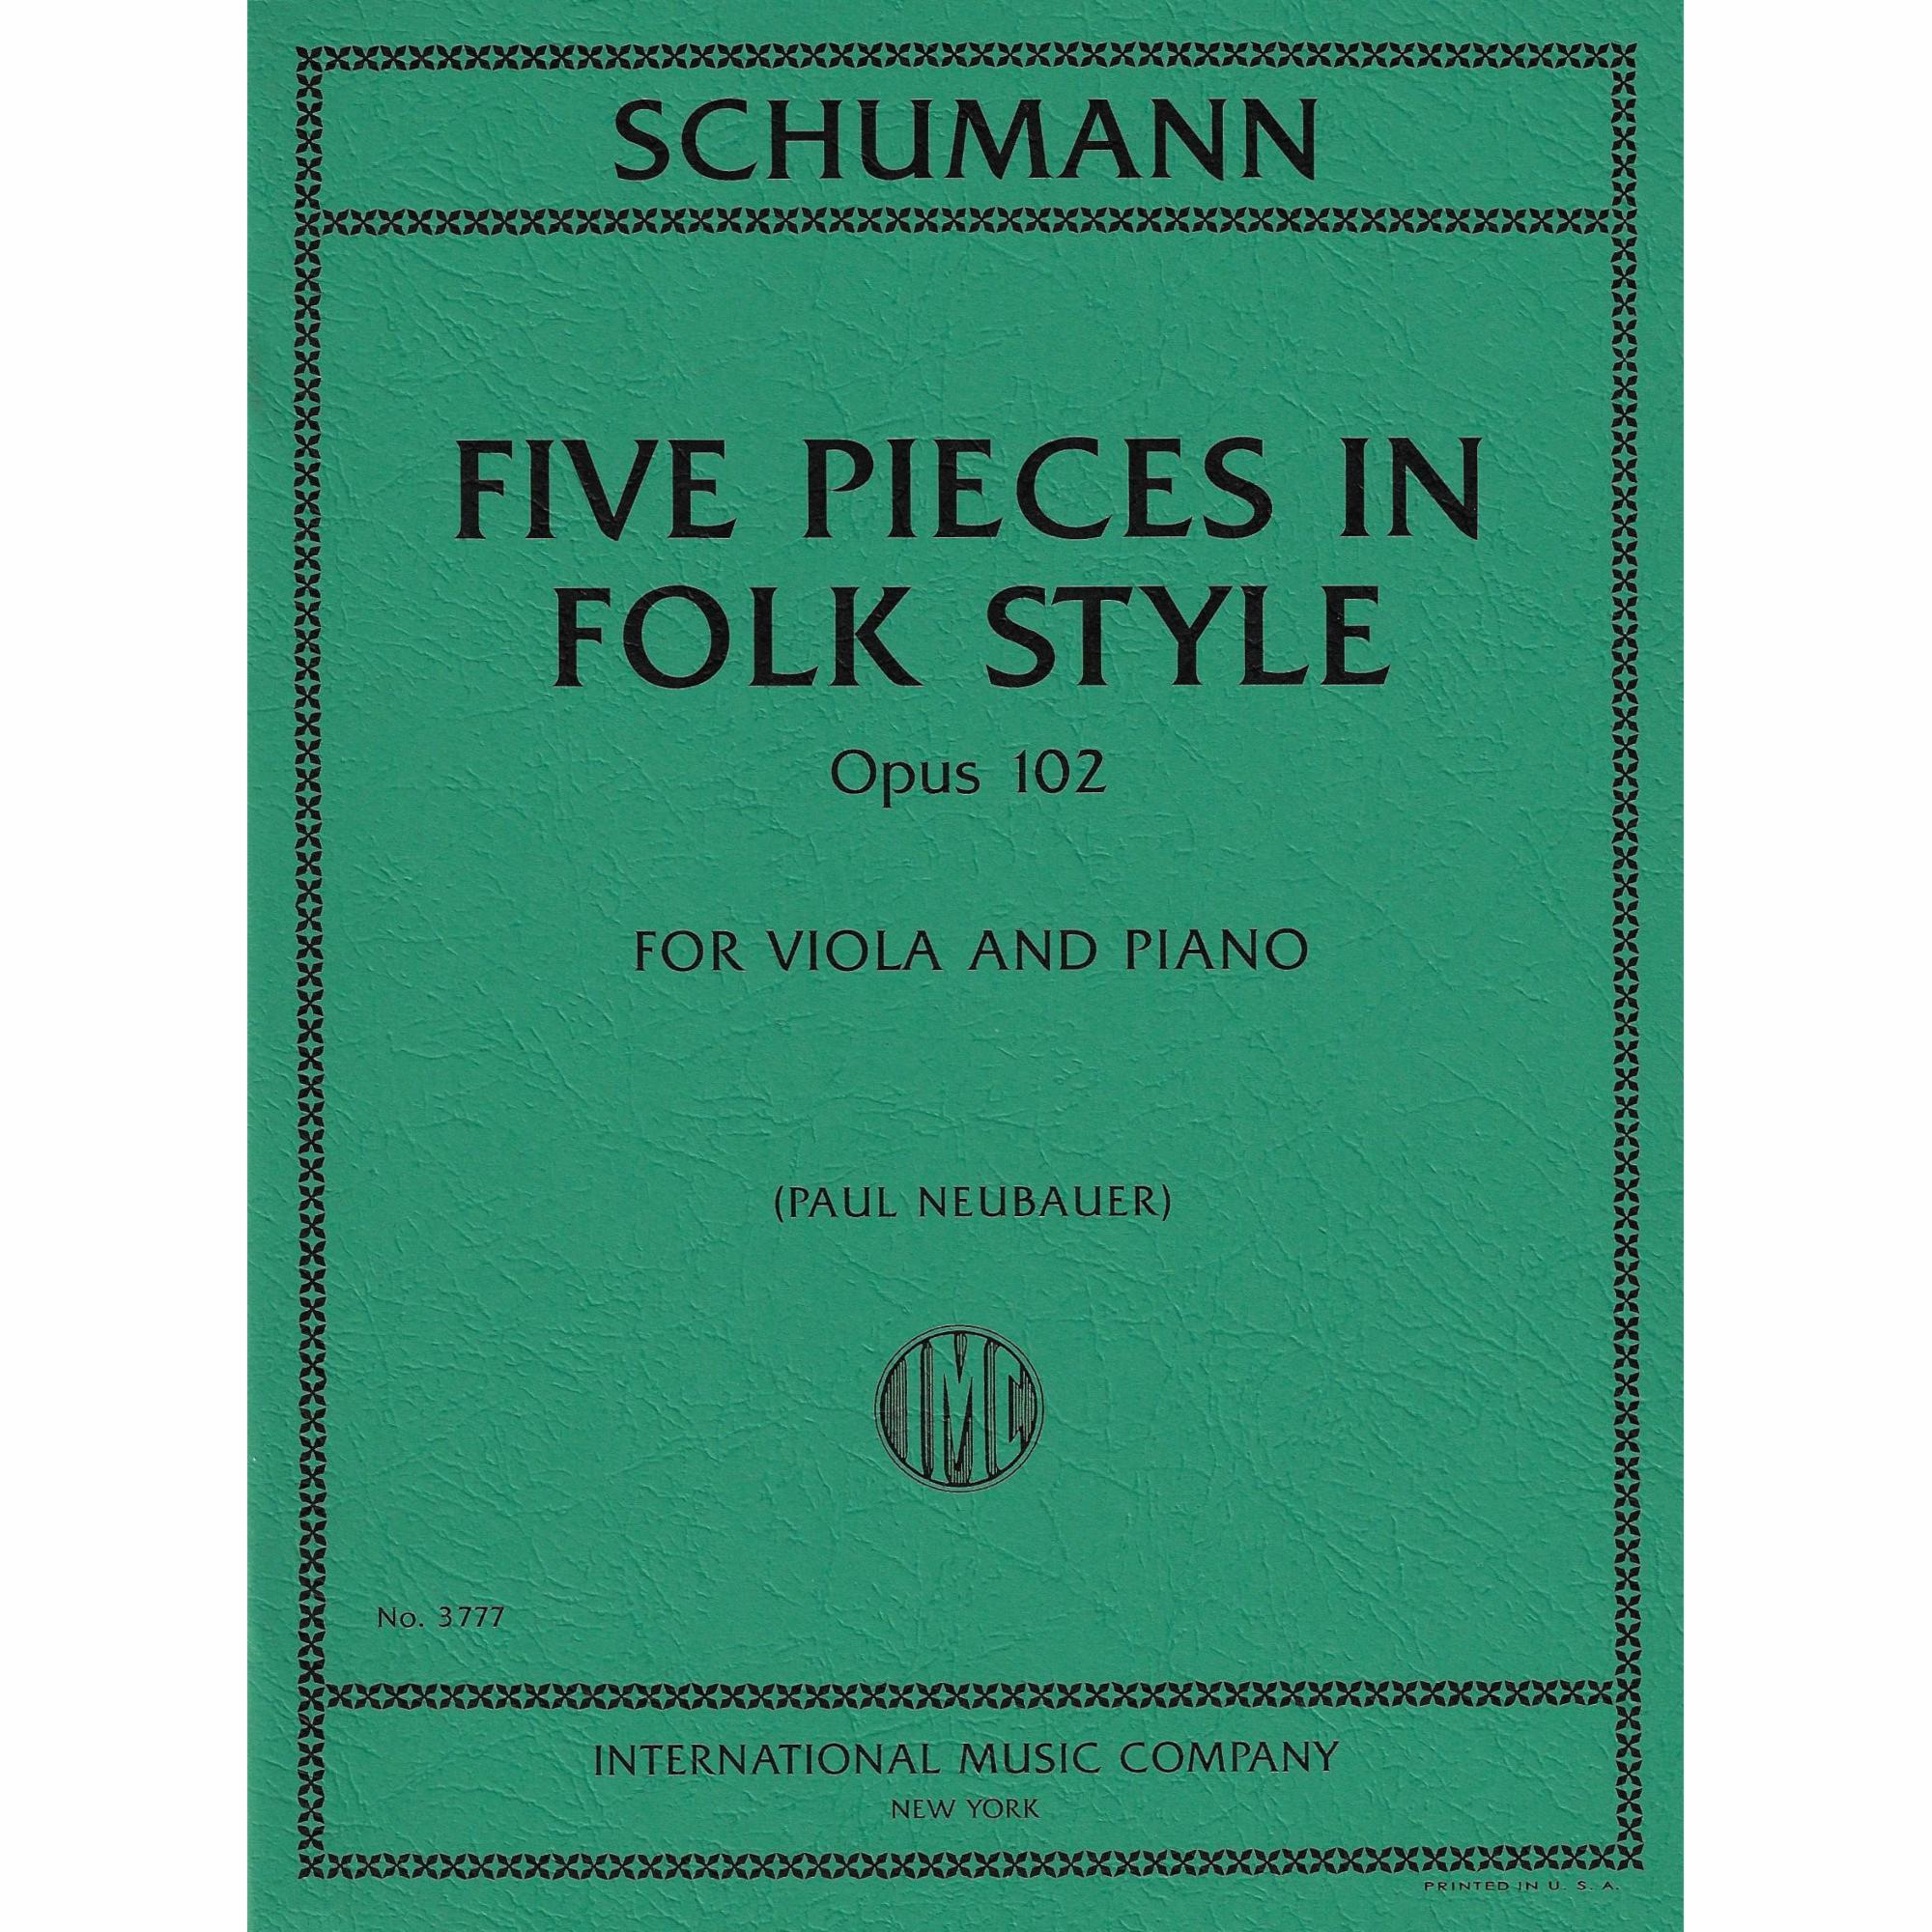 Five Pieces in Folk Style, Op. 102 for Viola and Piano